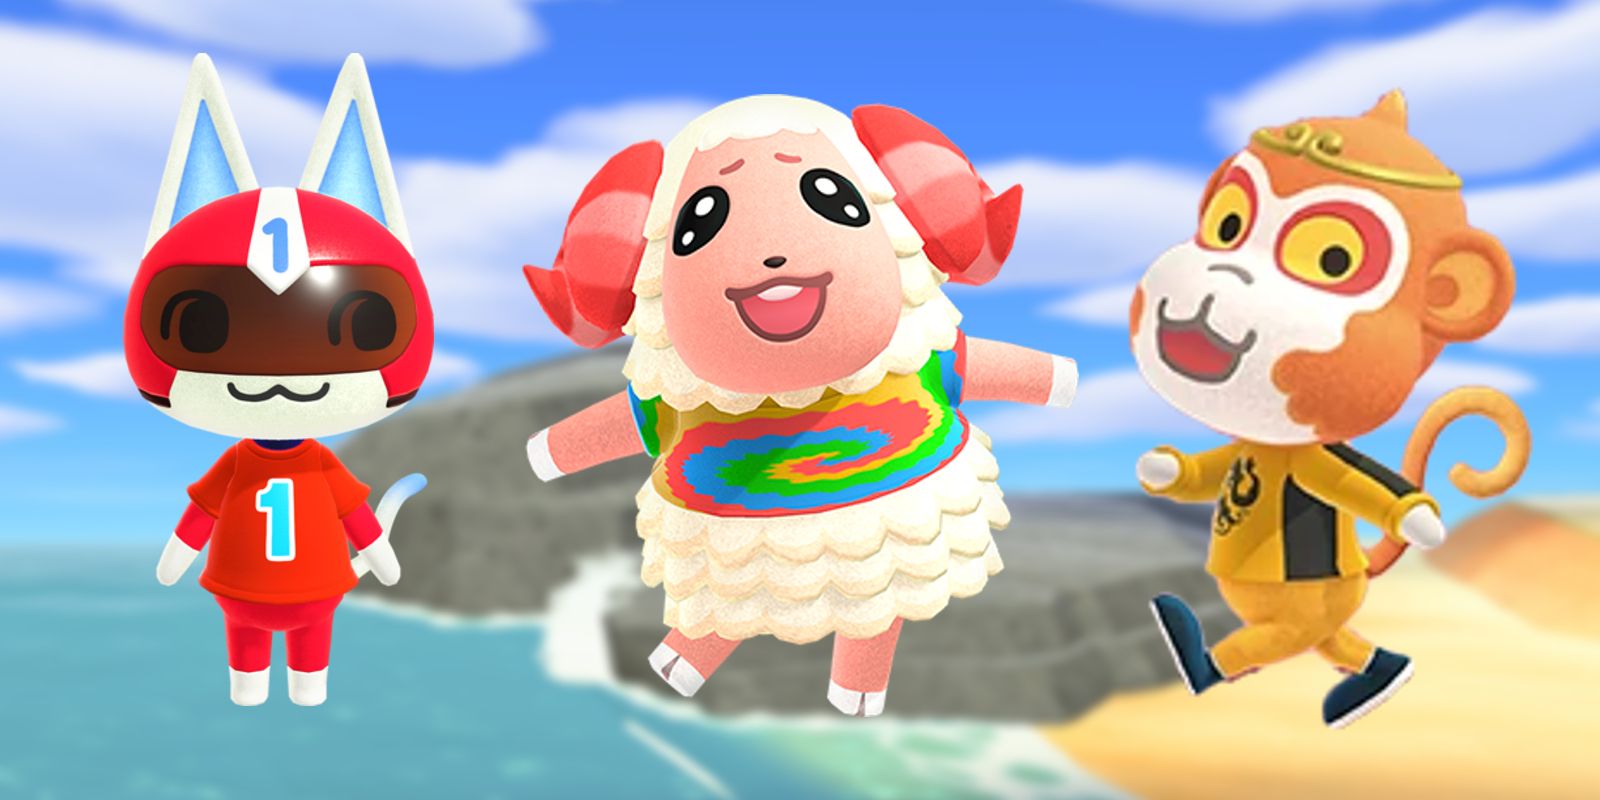 Jock villagers are the most common personality type in Animal Crossing: New Horizons.